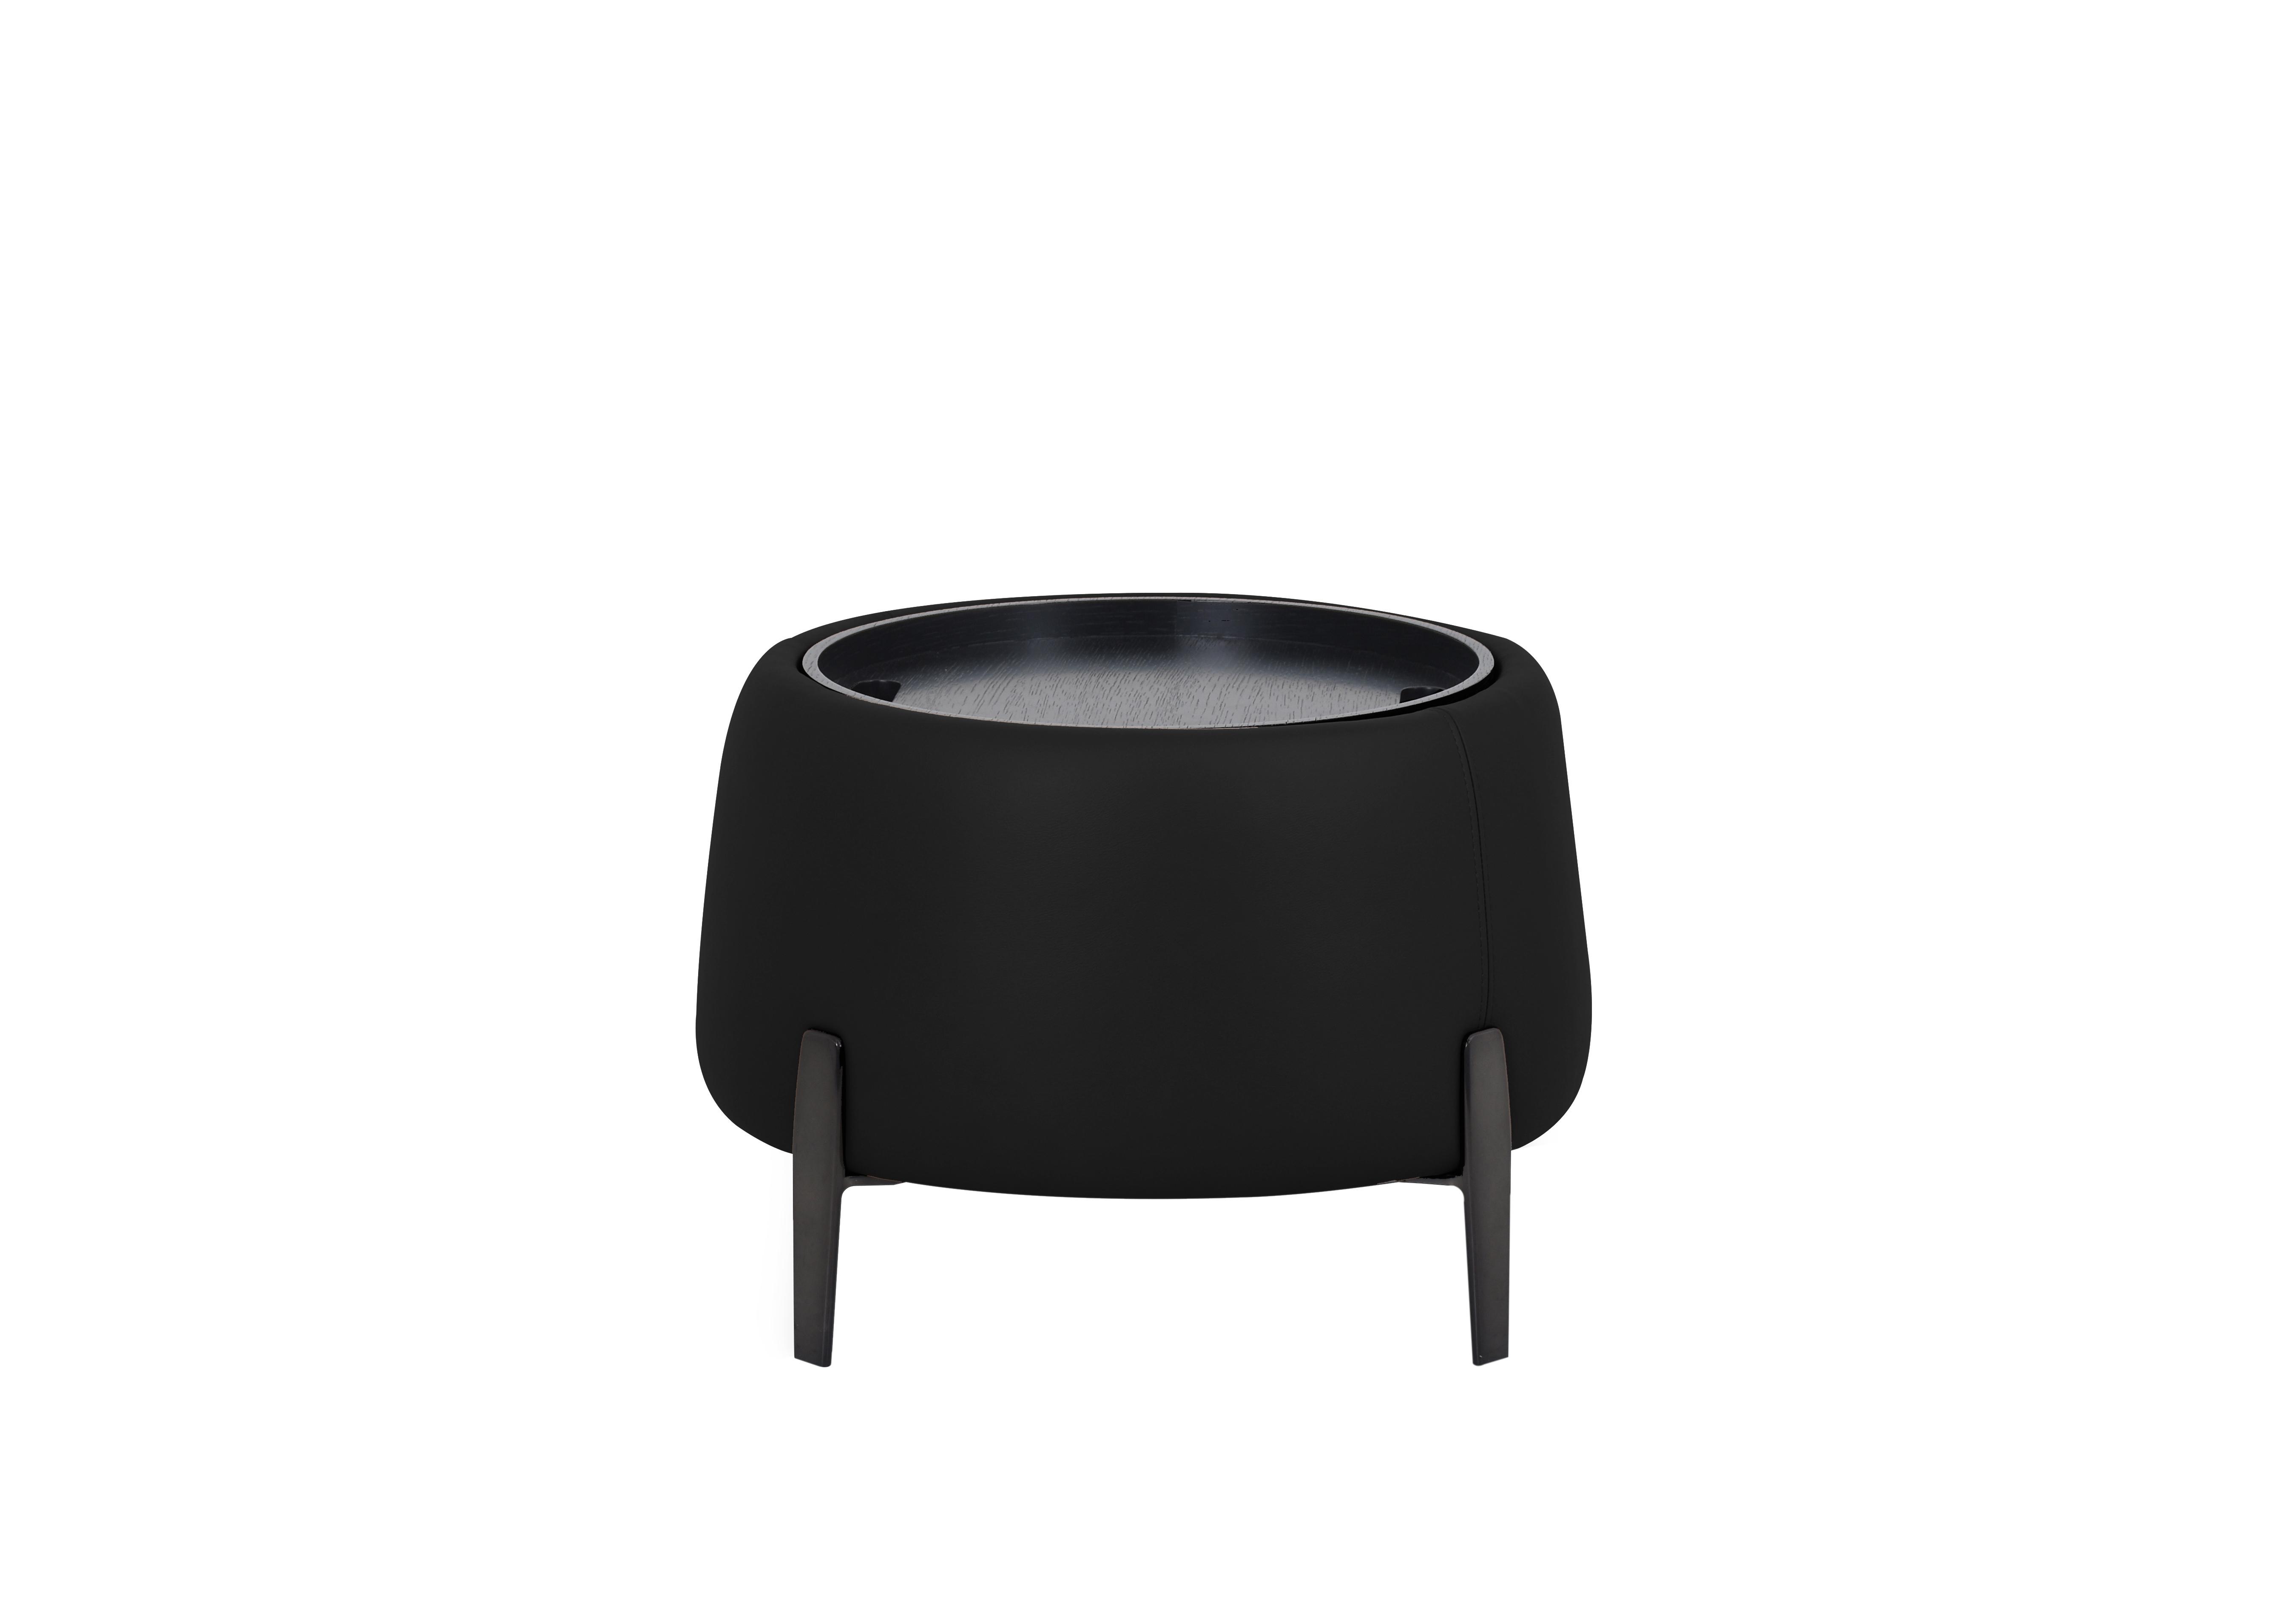 Maddox Leather Tray Storage Side Table in Nn-514e Black on Furniture Village